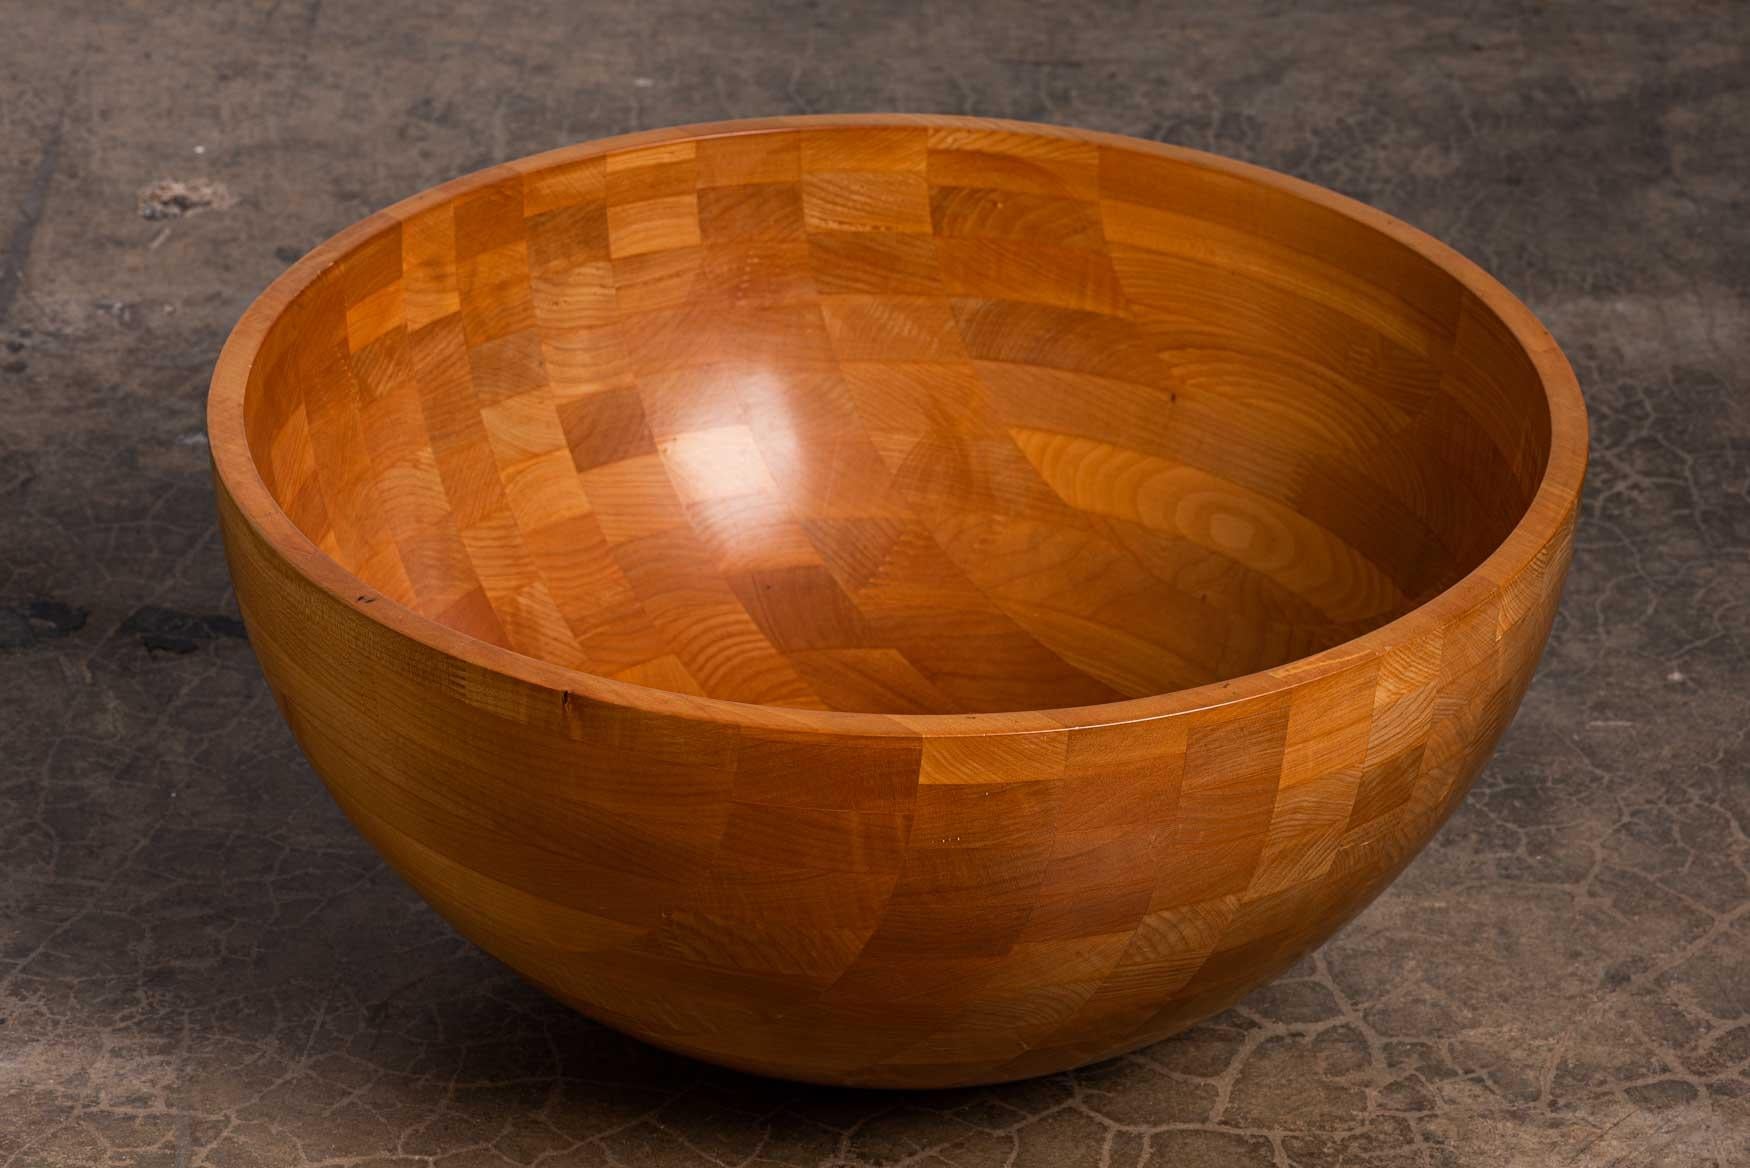 wood turned bowls for sale